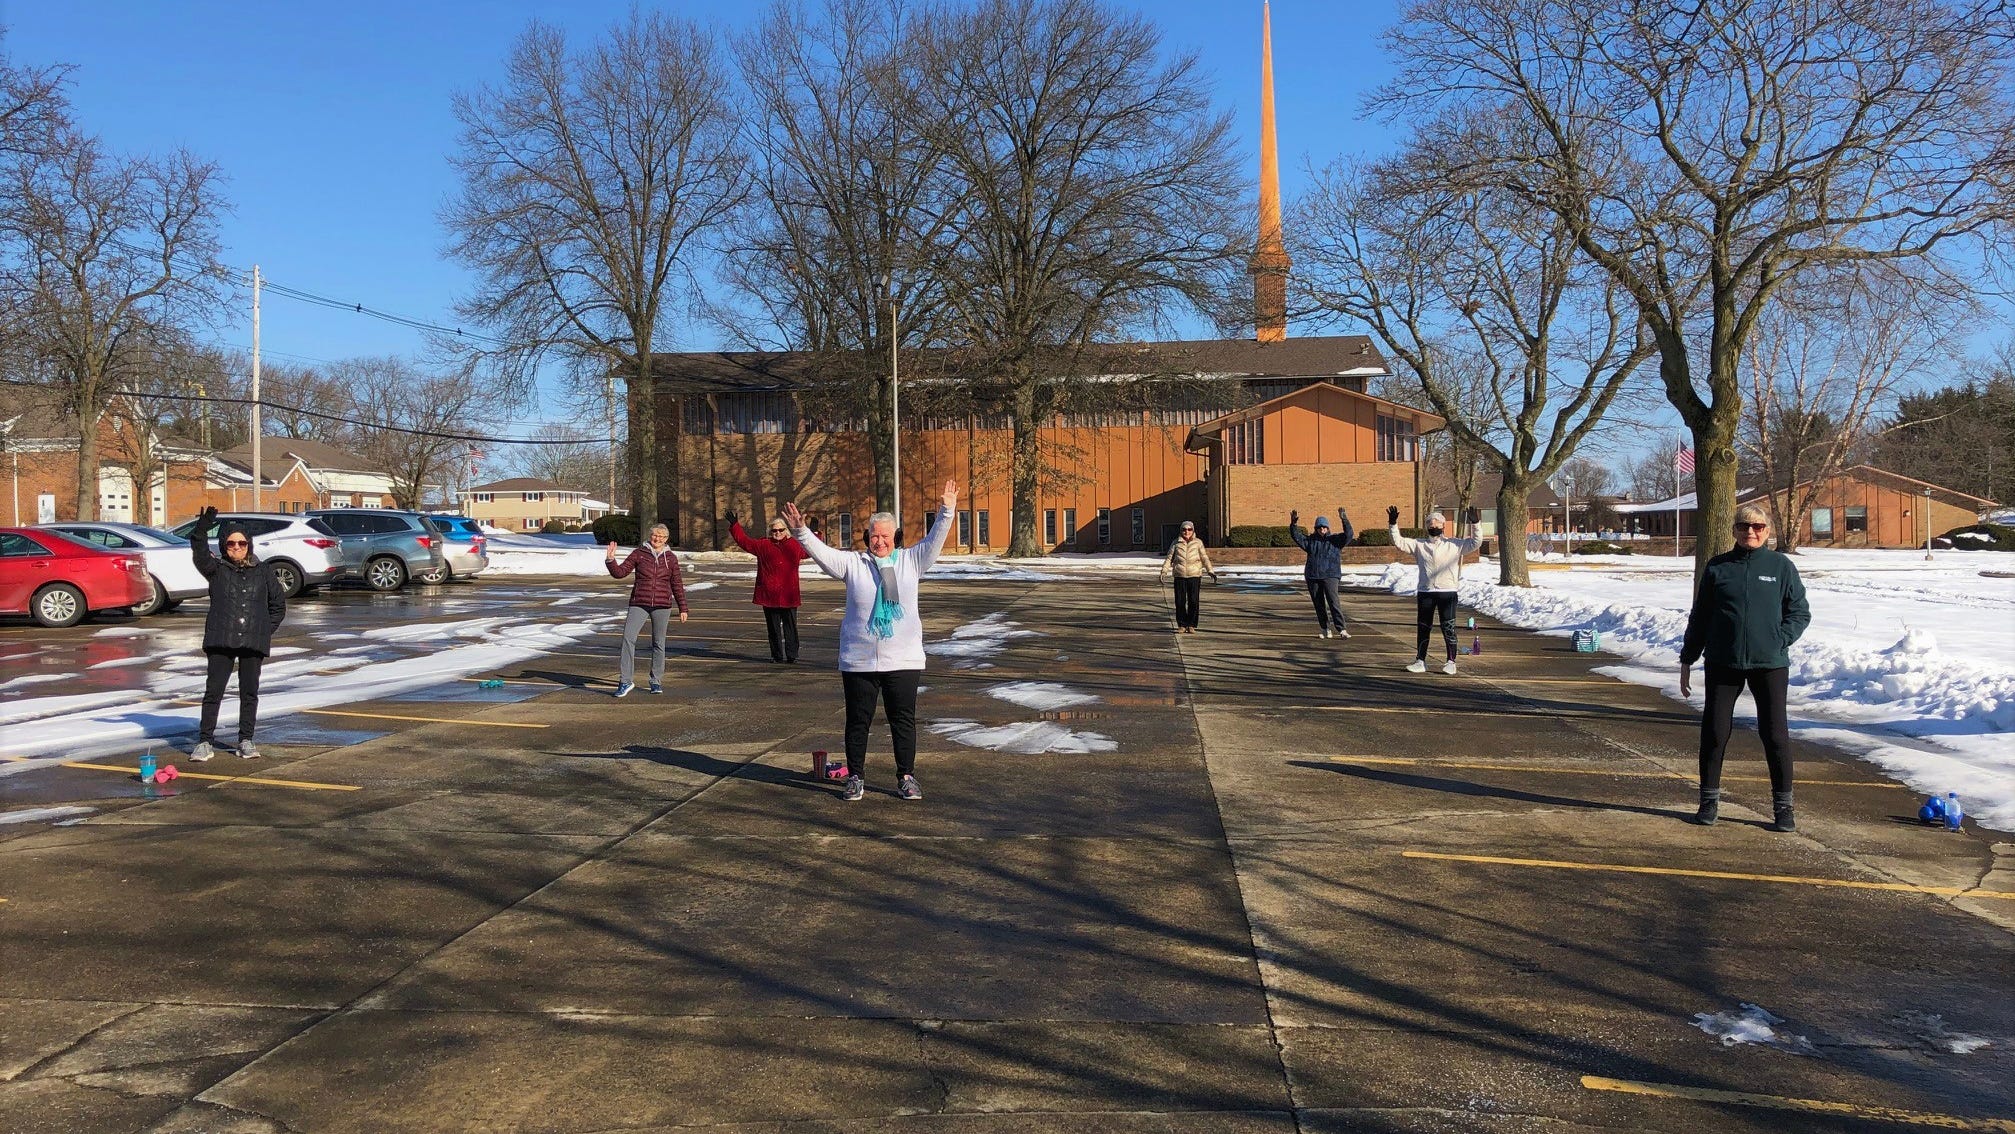 During the COVID-19 pandemic, YMCA fitness instructor Jenni Reusser has used a church parking lot to maintain her class.